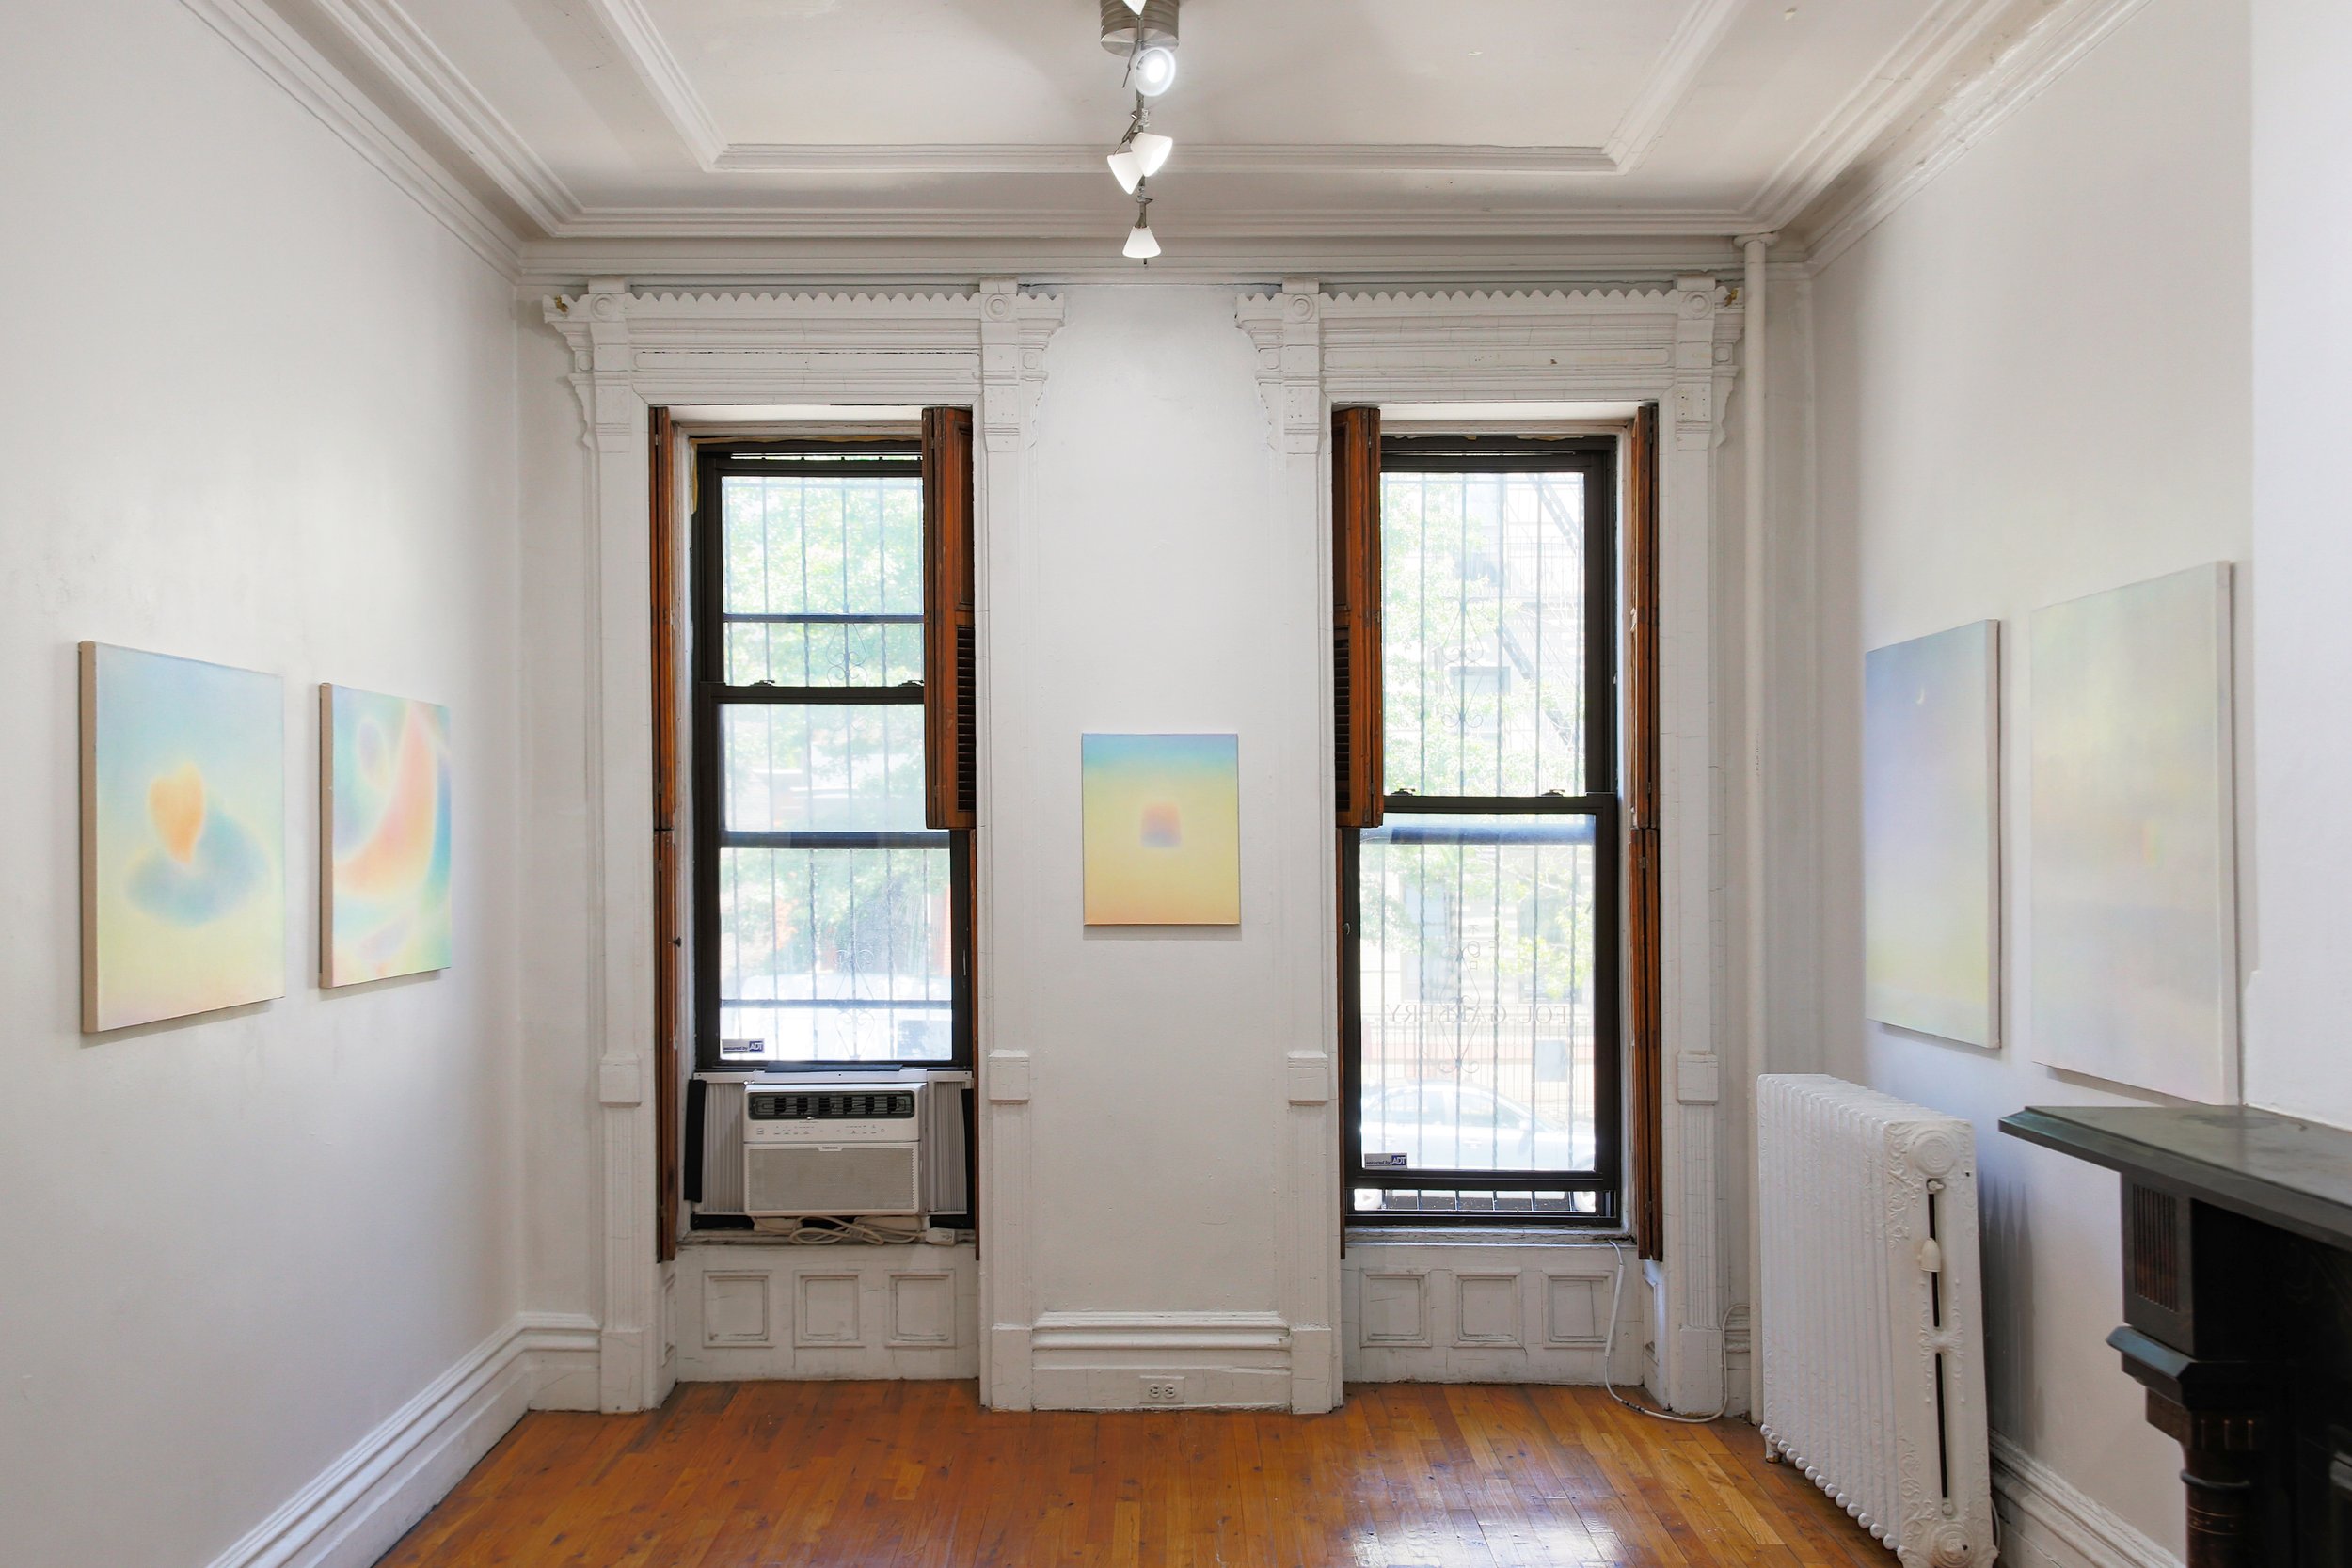  Installation view of Shuling Guo: Sotto Voce. Photo by Lynn Hai ©Shuling Guo, courtesy of Fou Gallery 